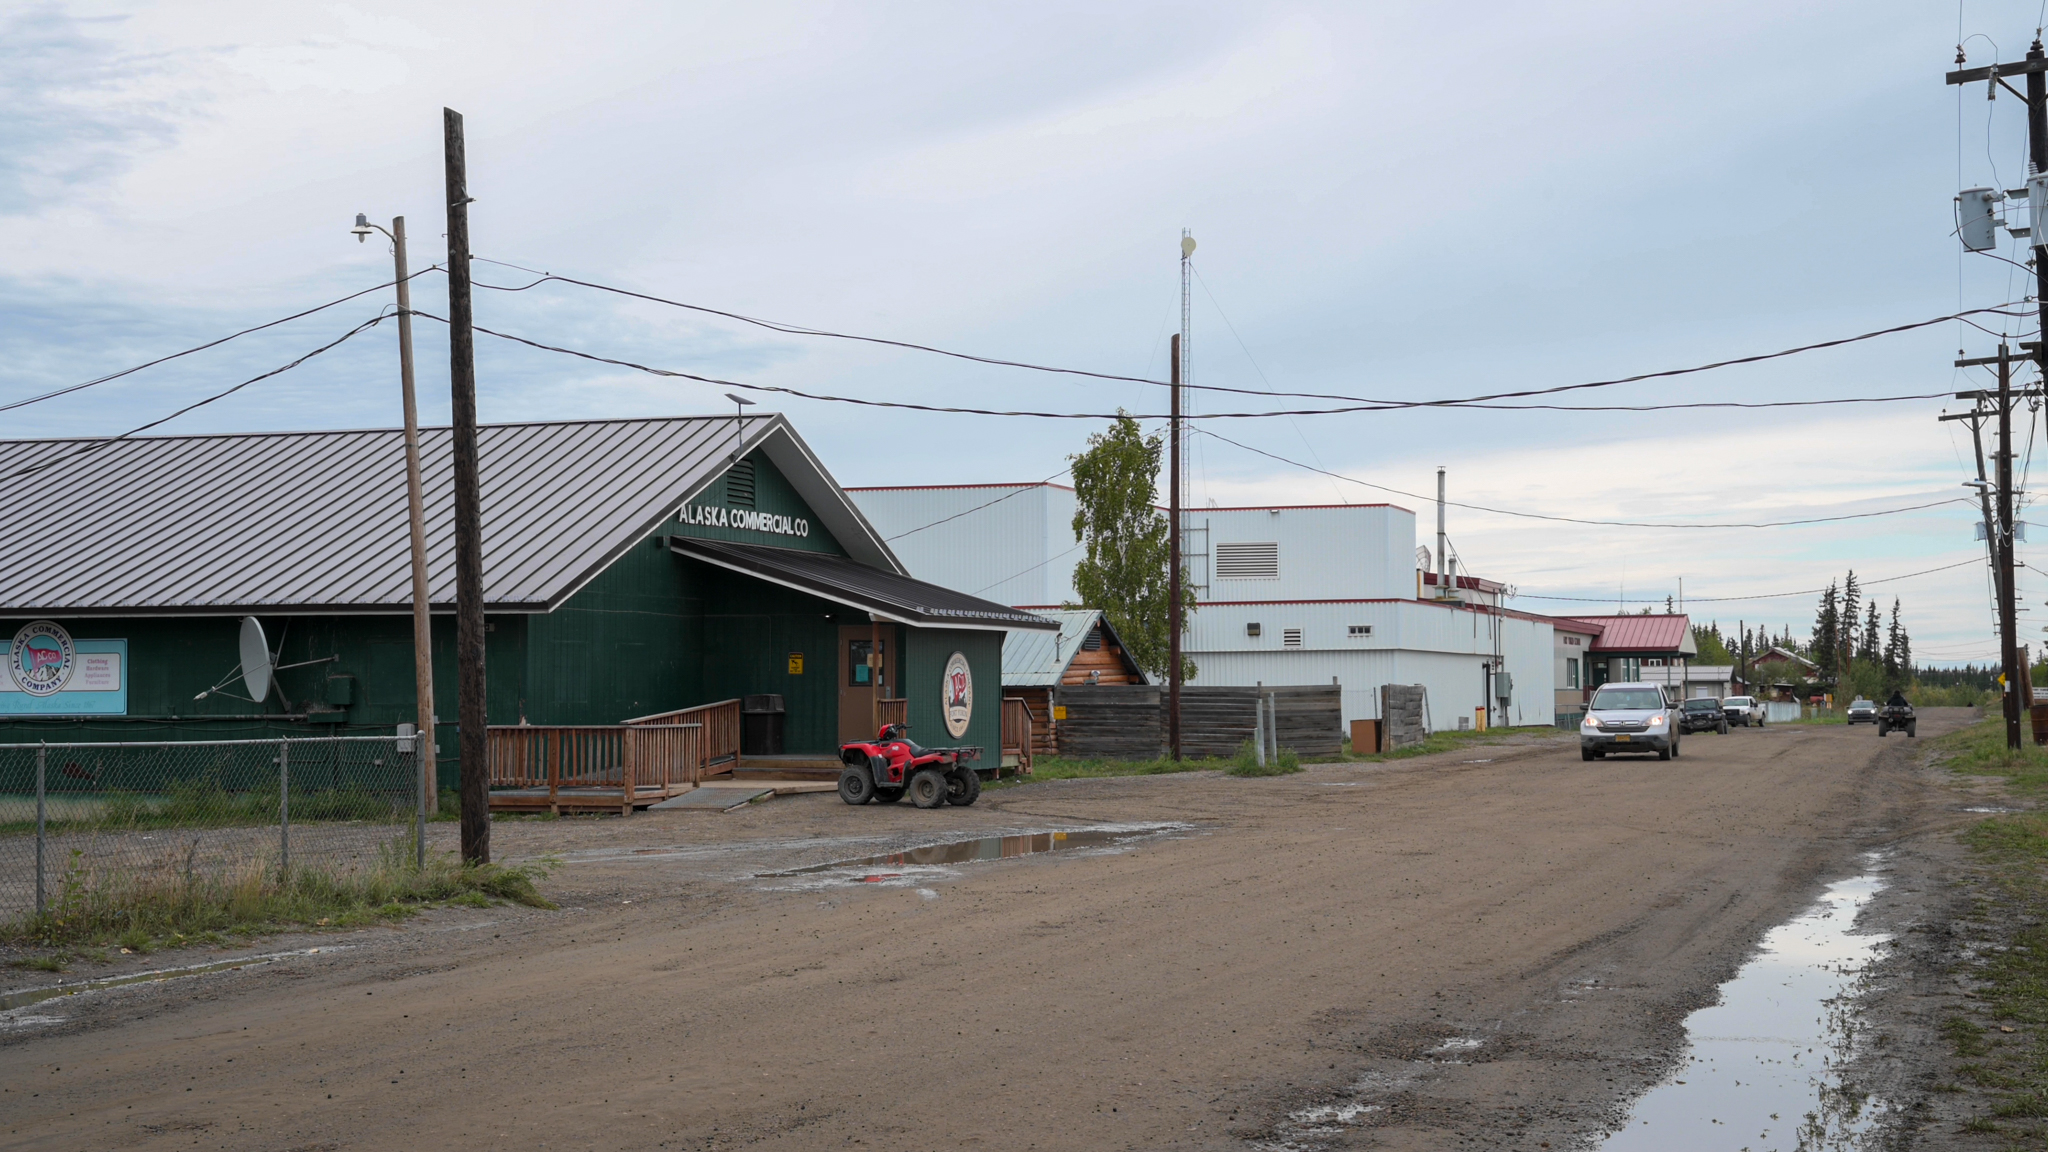 A picture of the town Fort Yukon.